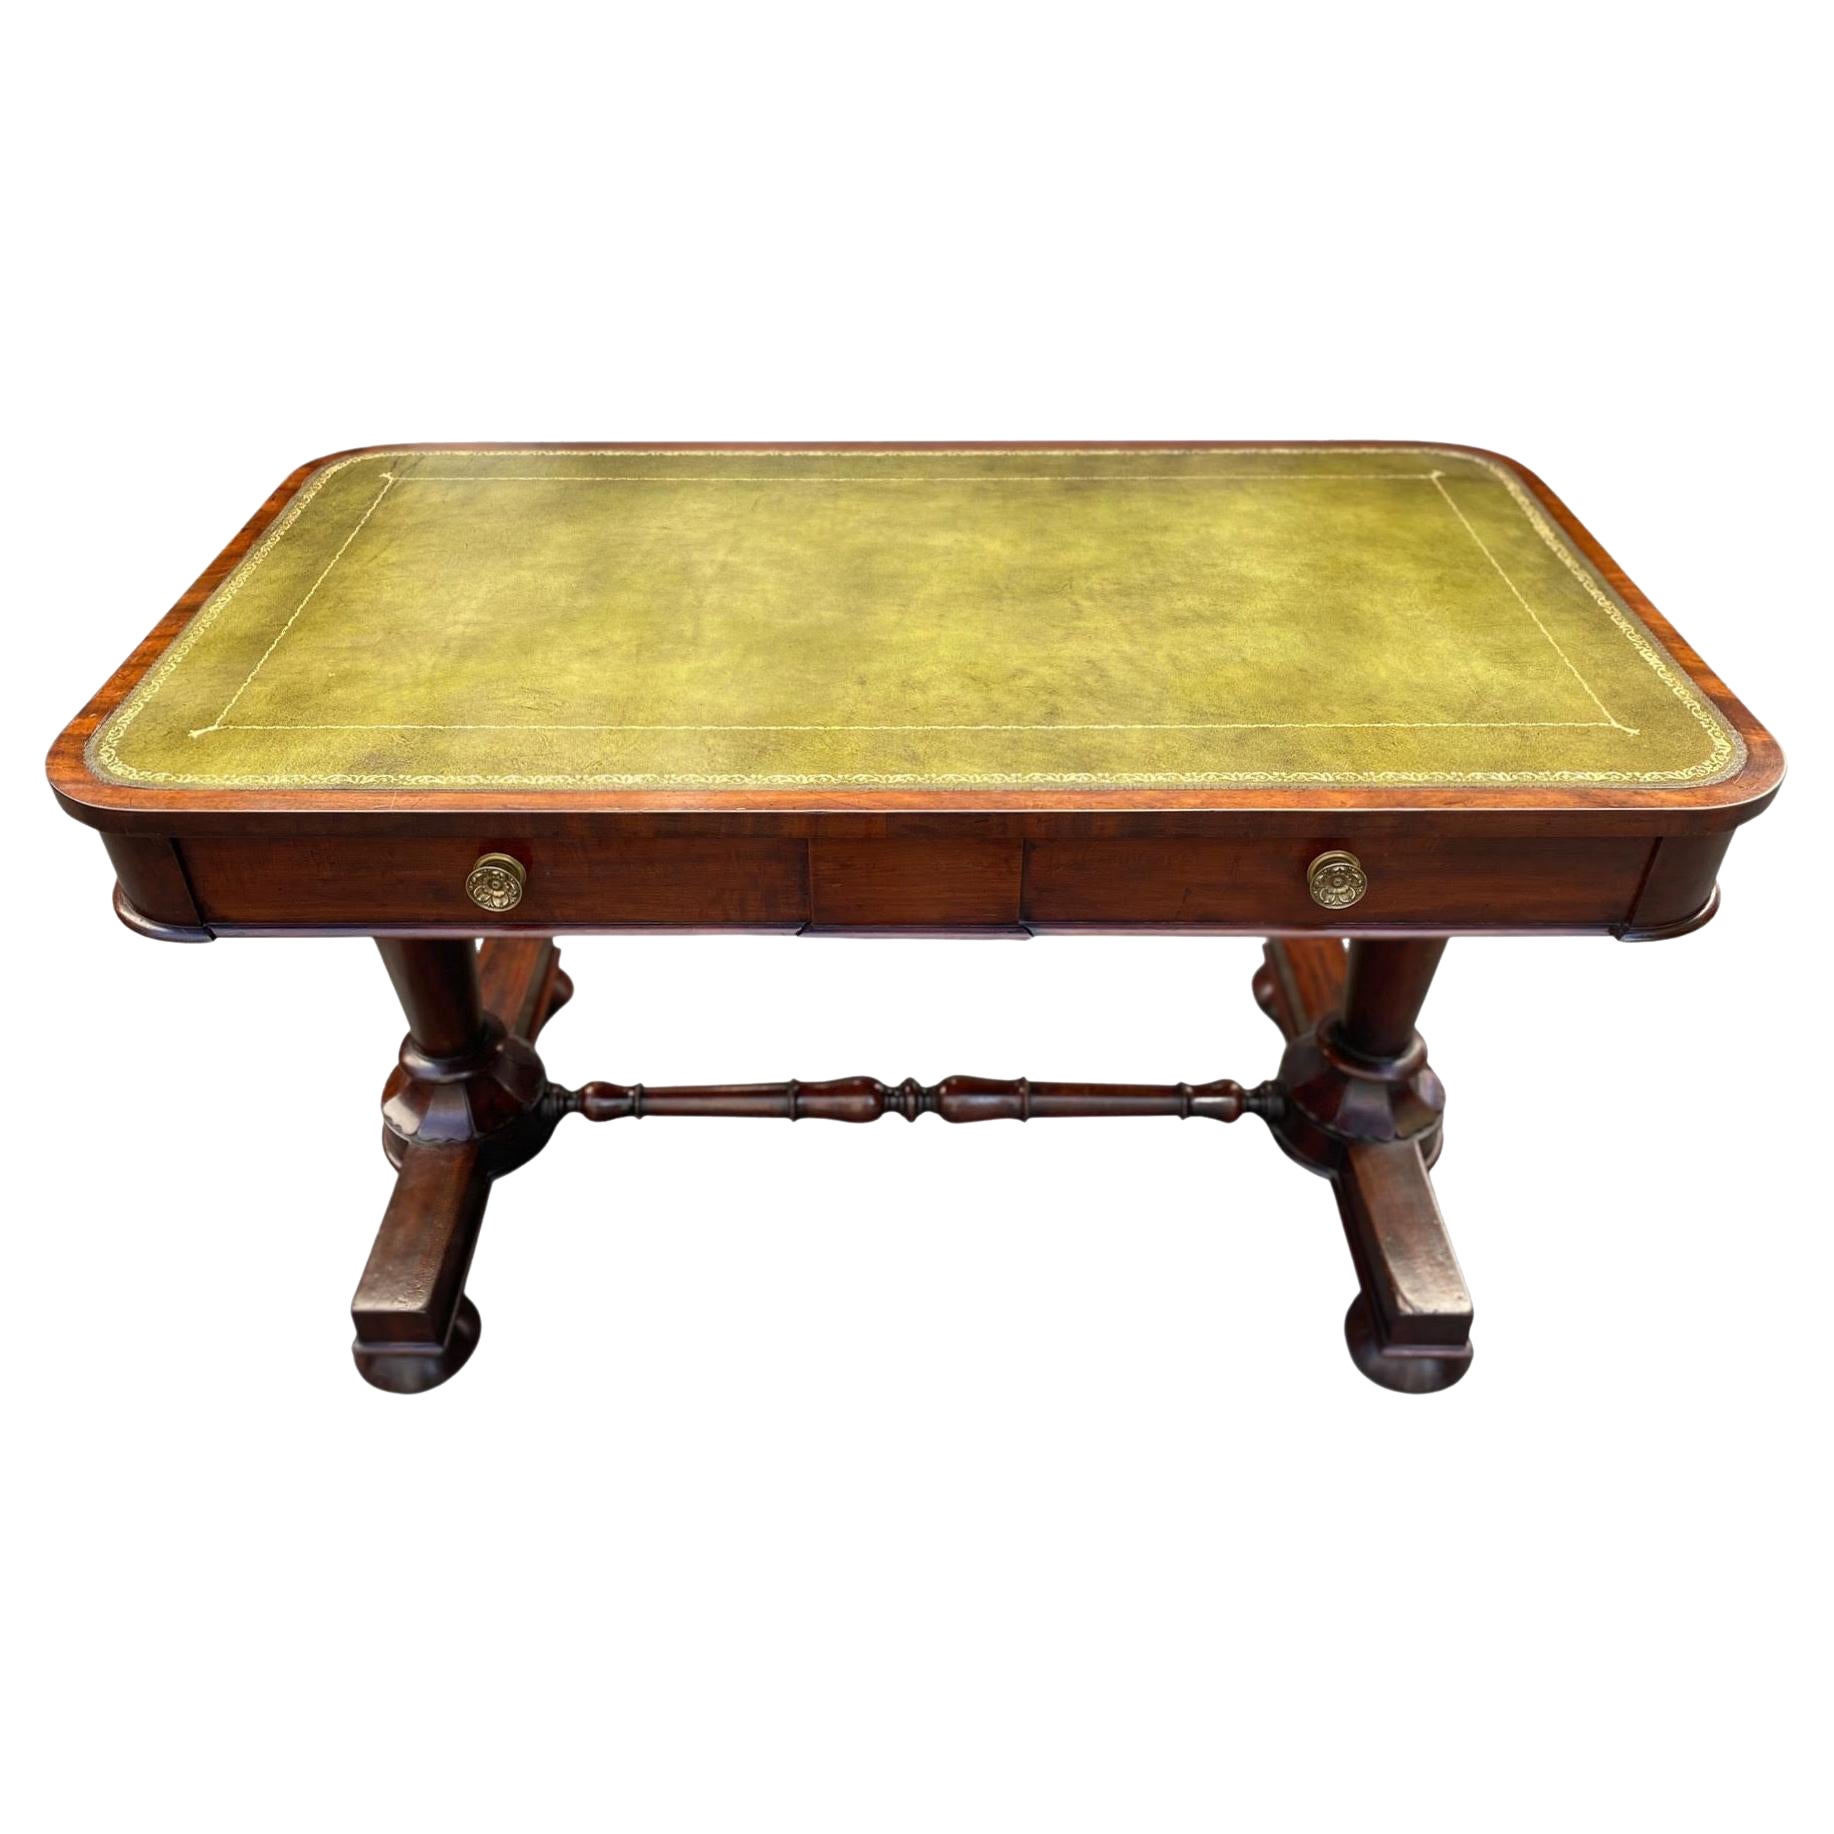 Early 19th Century William IV Period Mahogany Library Writing Table